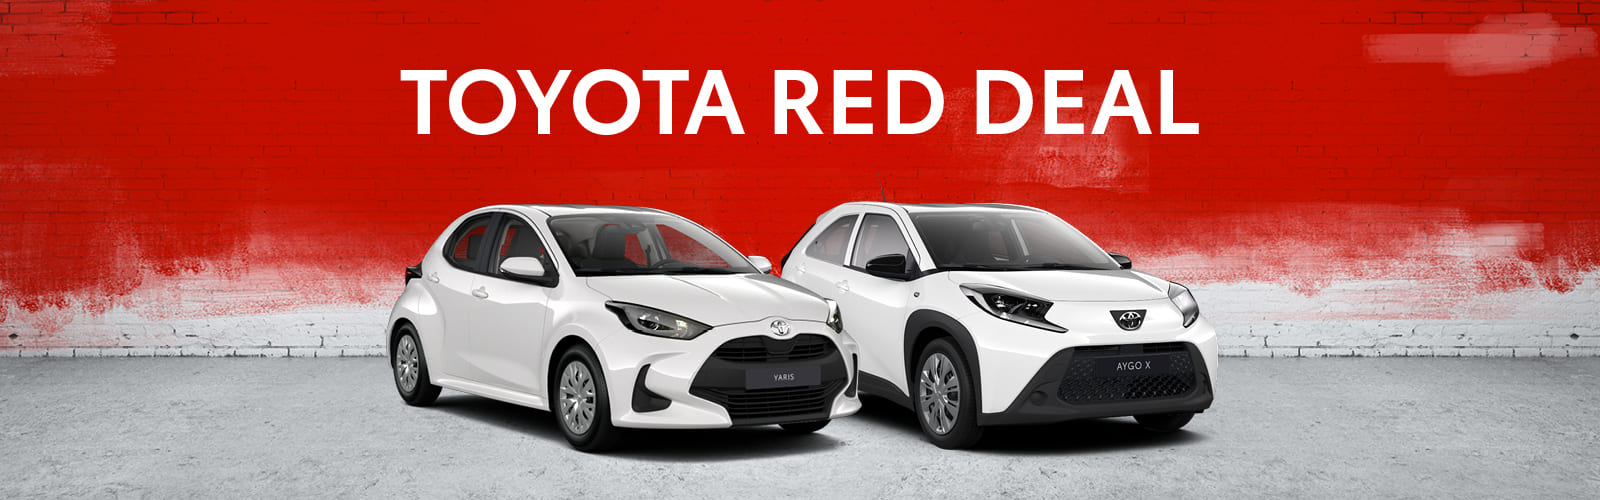 Toyota RED DEAL Banner